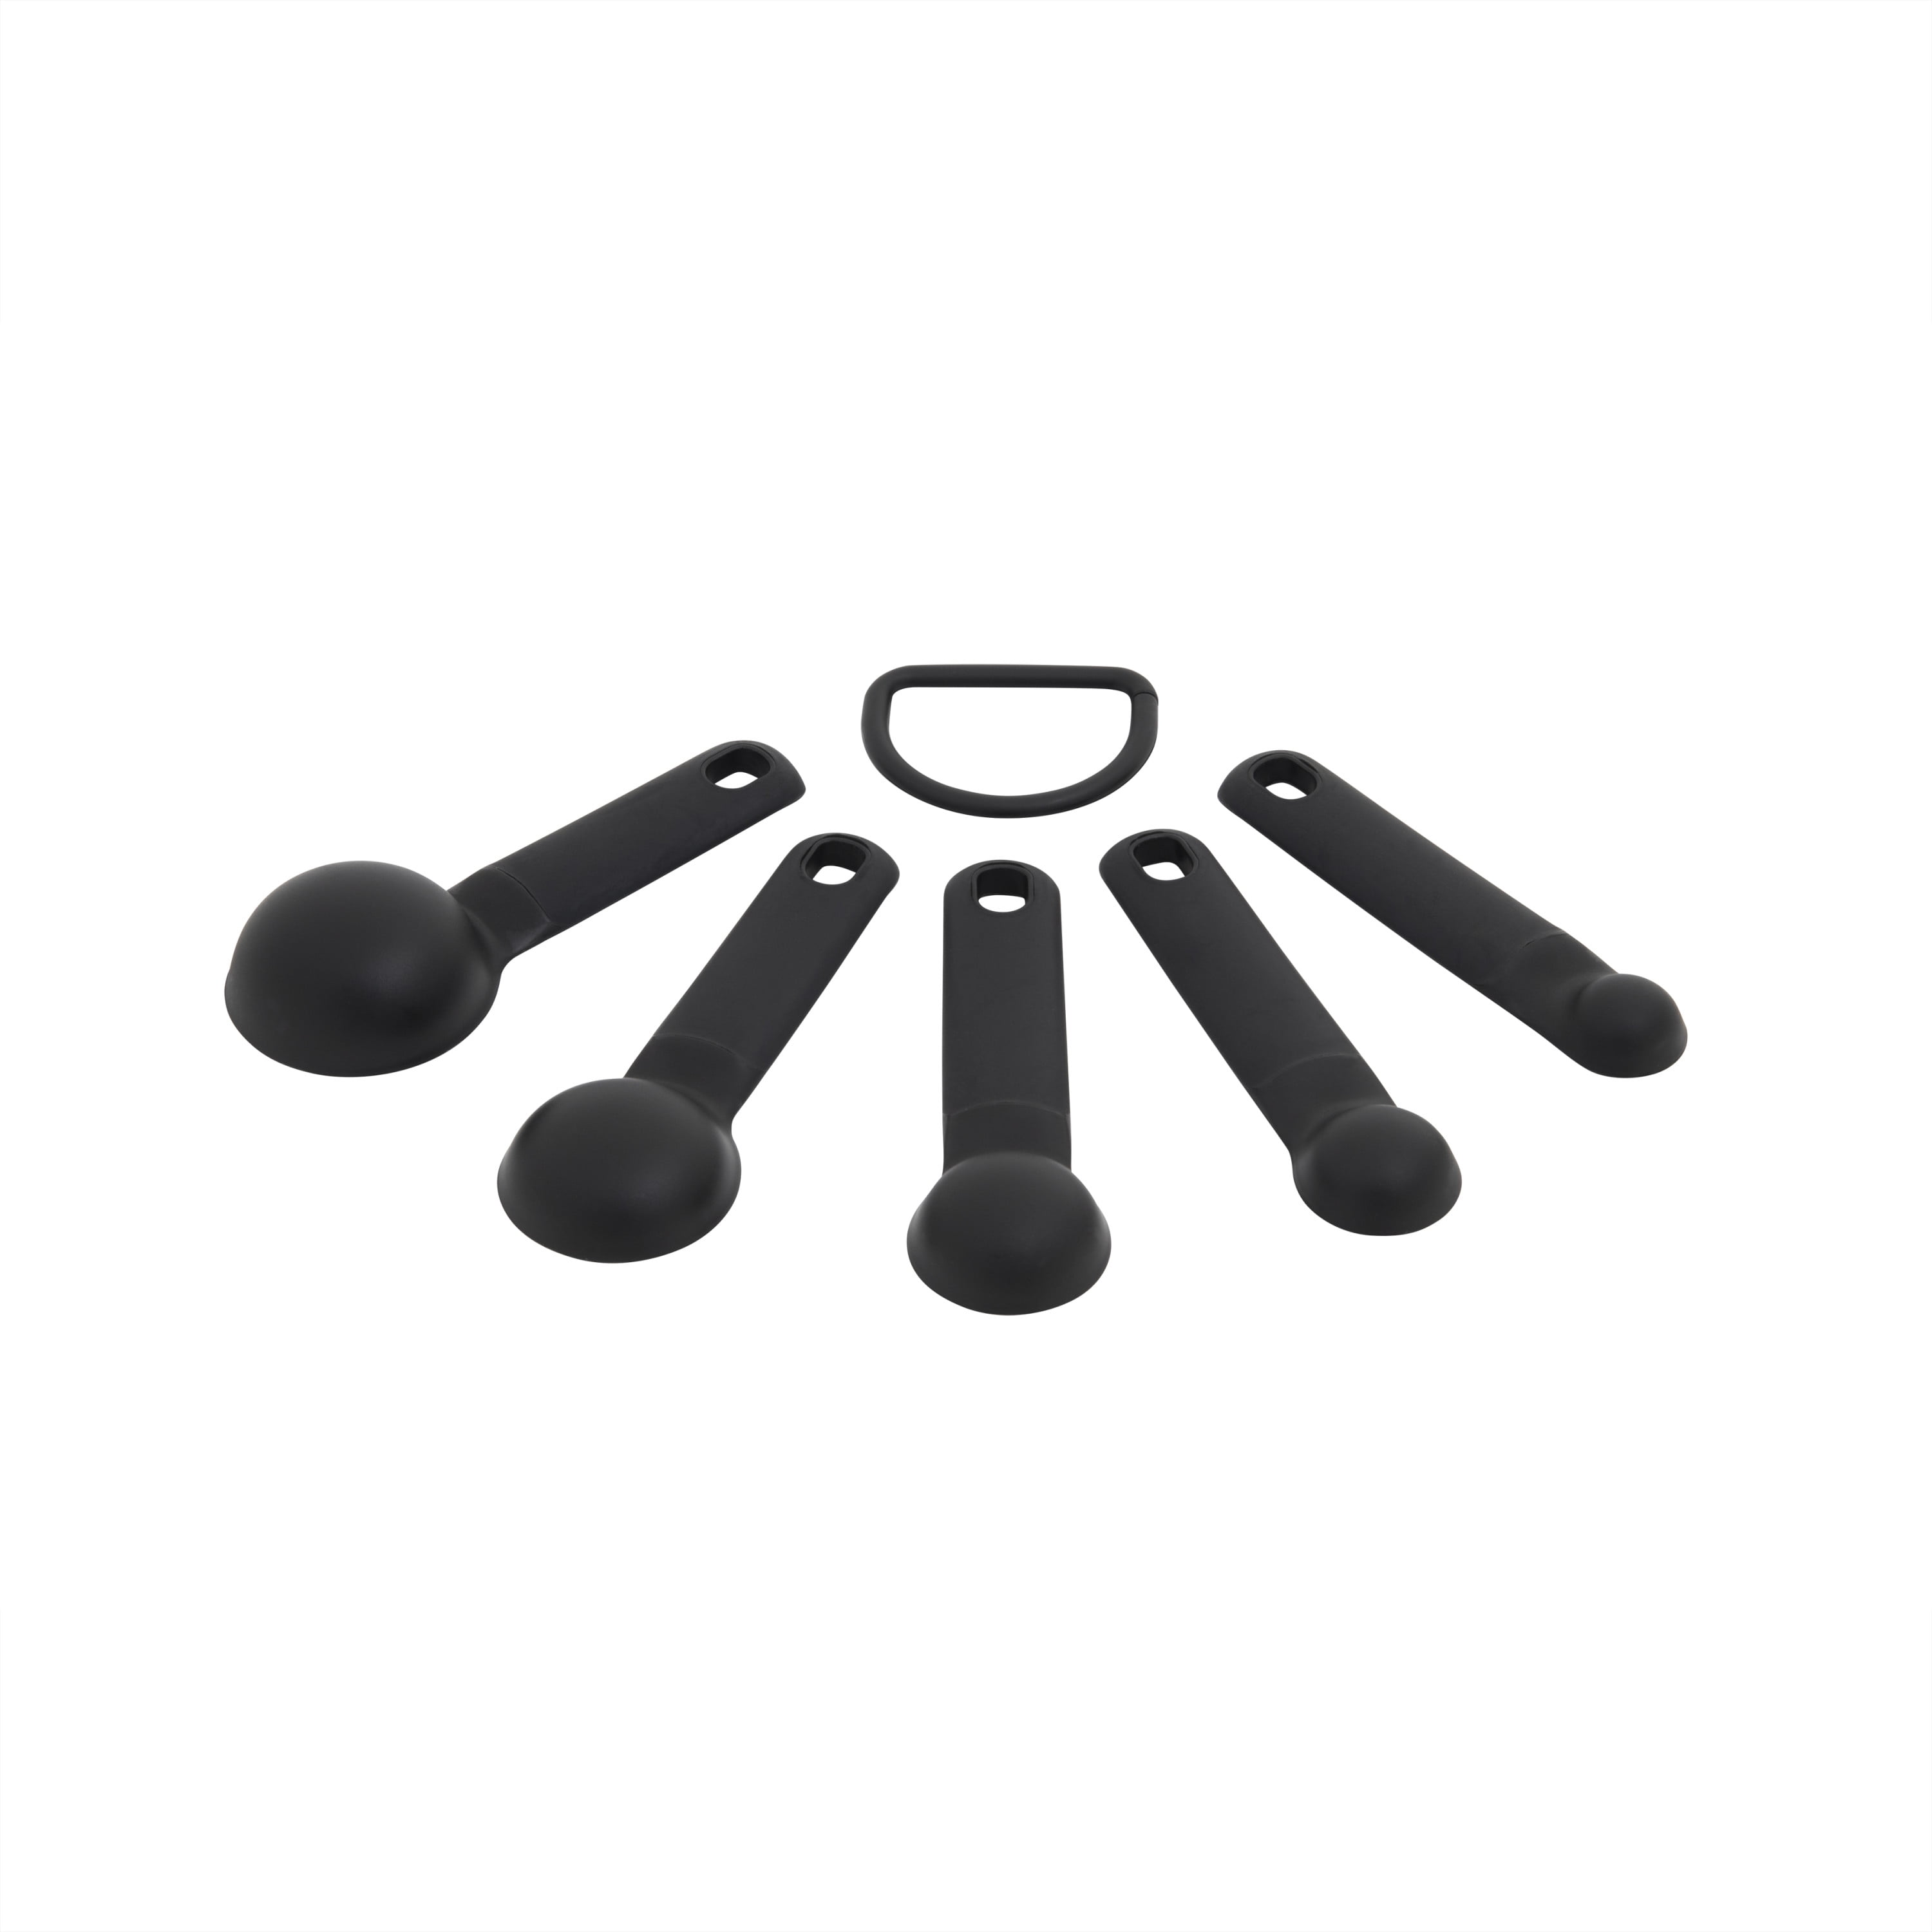  KitchenAid Universal Measuring Cup and Spoon Set, 1/4, 1/2,  1/3, and 1 cup size, and 1 tablespoon, 1/2 tablespoon, 1 teaspoon, 1/2  teaspoon, and 1/4 teaspoon size, Dishwasher Safe, 9 Piece, Black: Home &  Kitchen